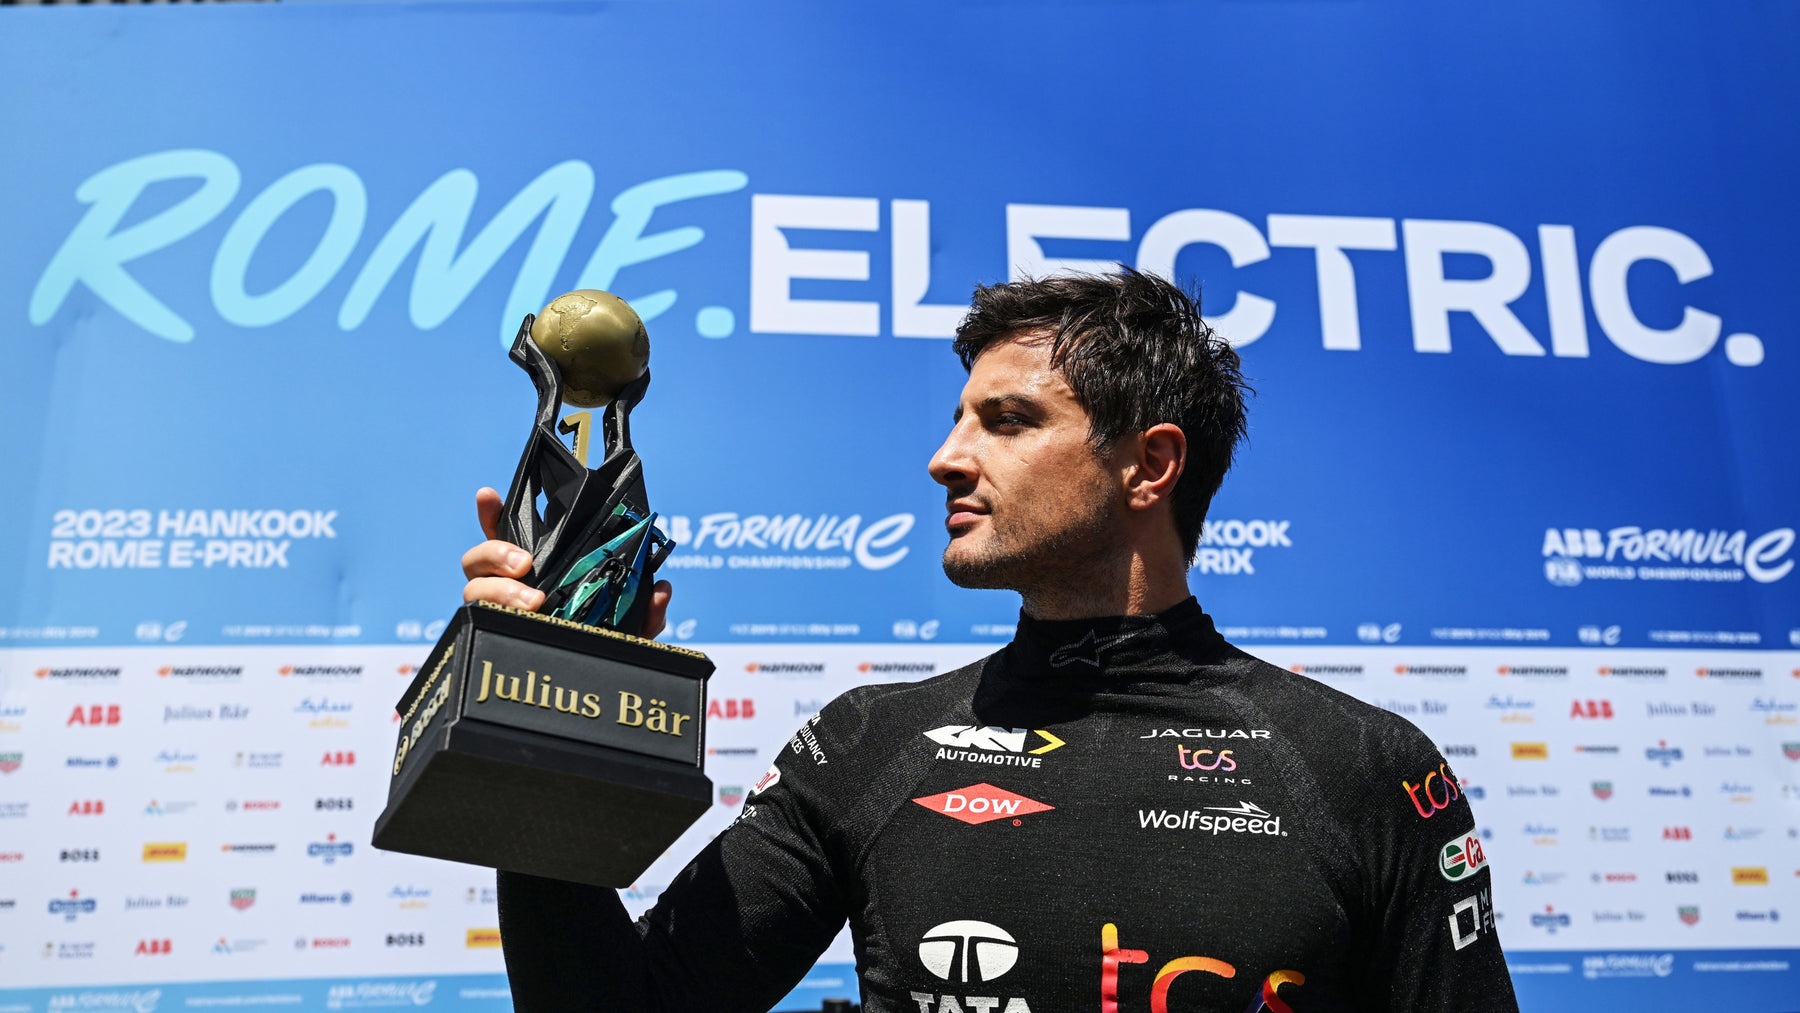 FORMULA E E-PRIX RACE ONE WINNING DELIGHT FOR MITCH EVANS ON THE STREETS OF ROME